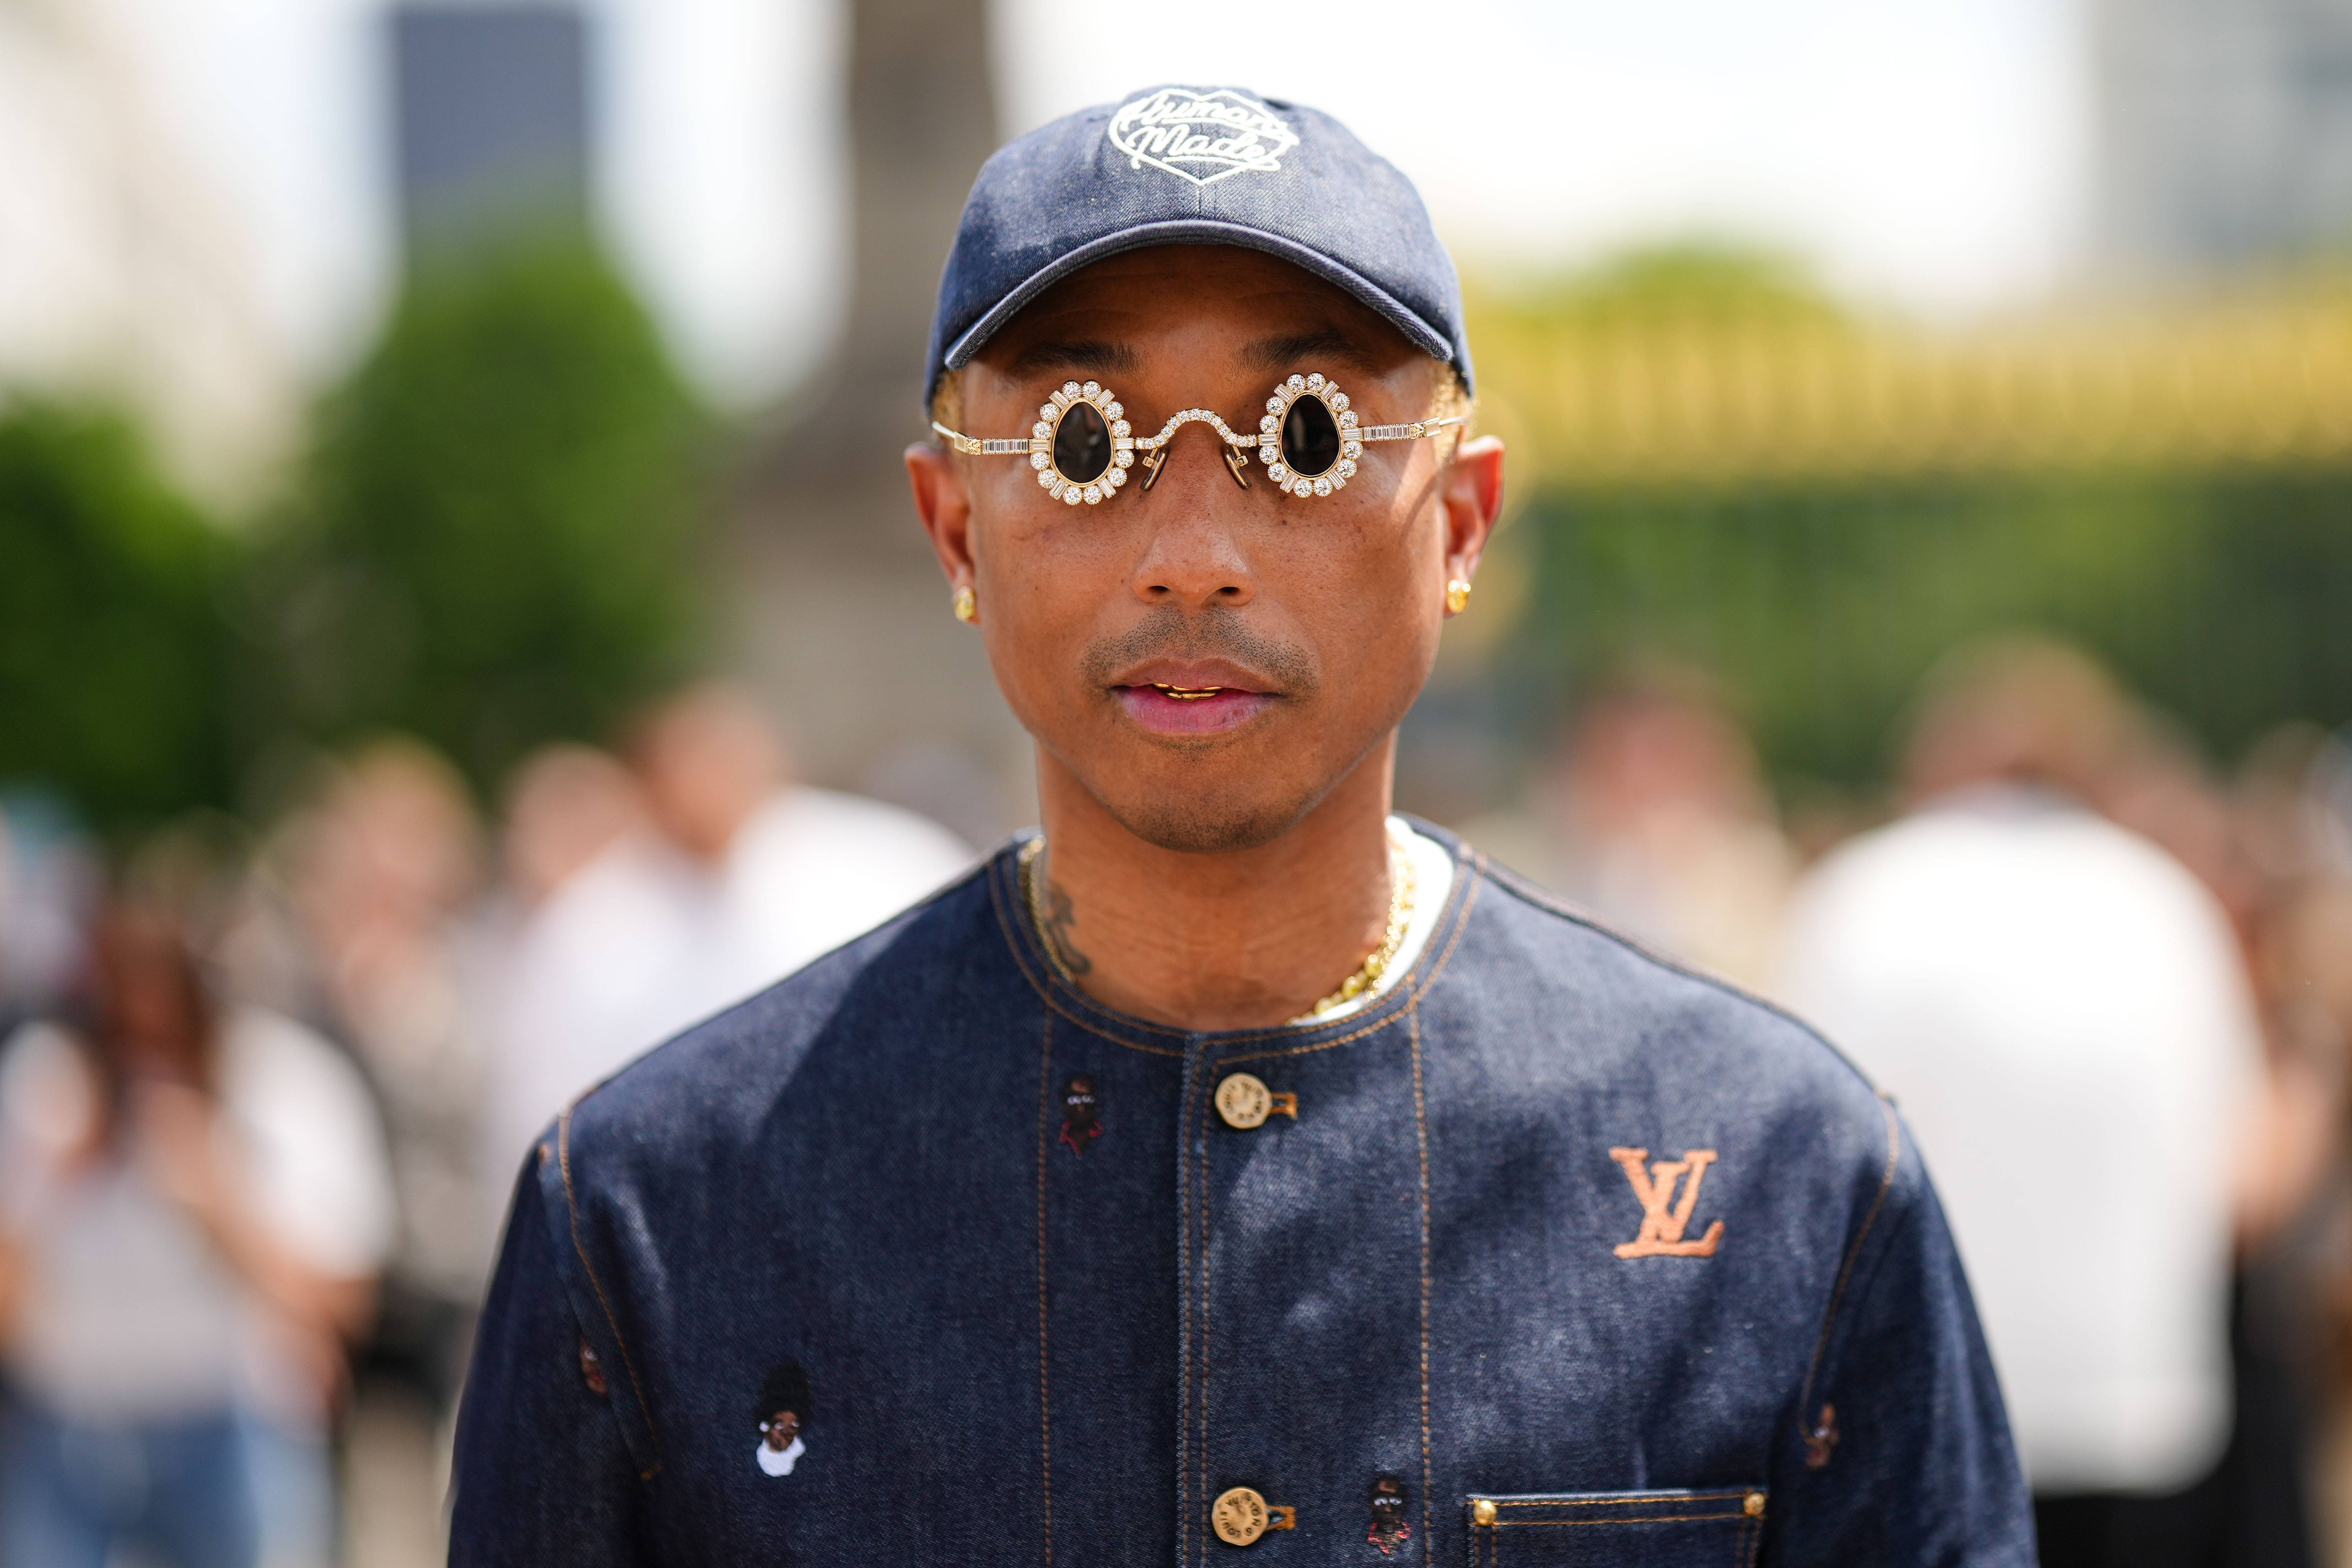 Pharrell Williams & Louis Vuitton Relationship Over the Years